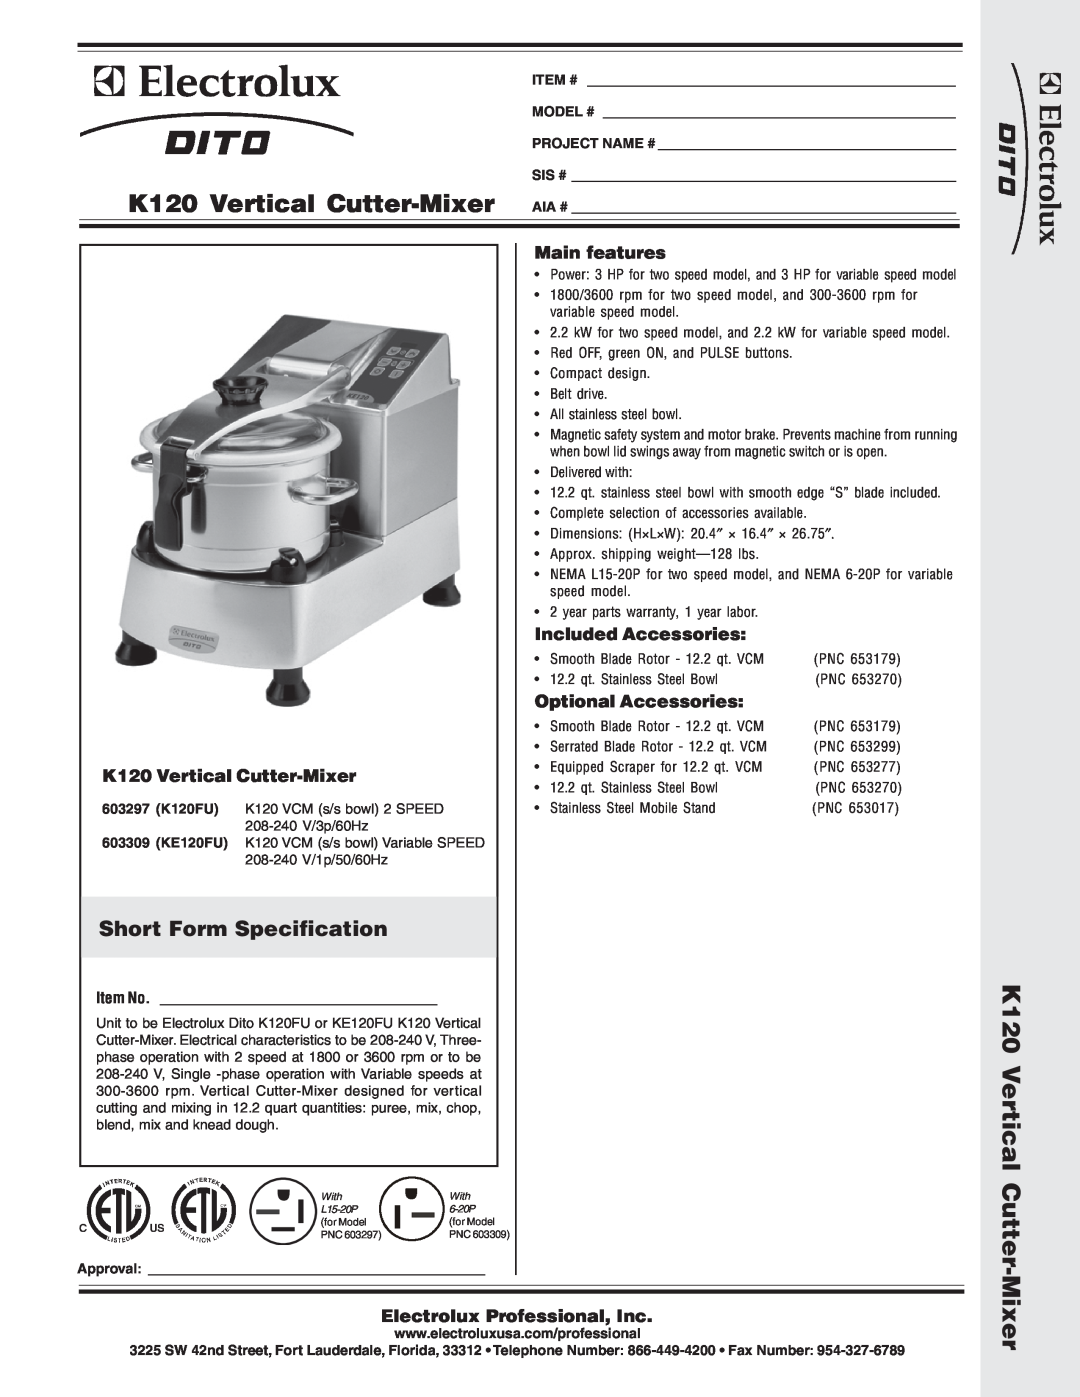 Electrolux KE120FU dimensions Short Form Specification, K120 Vertical Cutter-Mixer, Main features, Included Accessories 